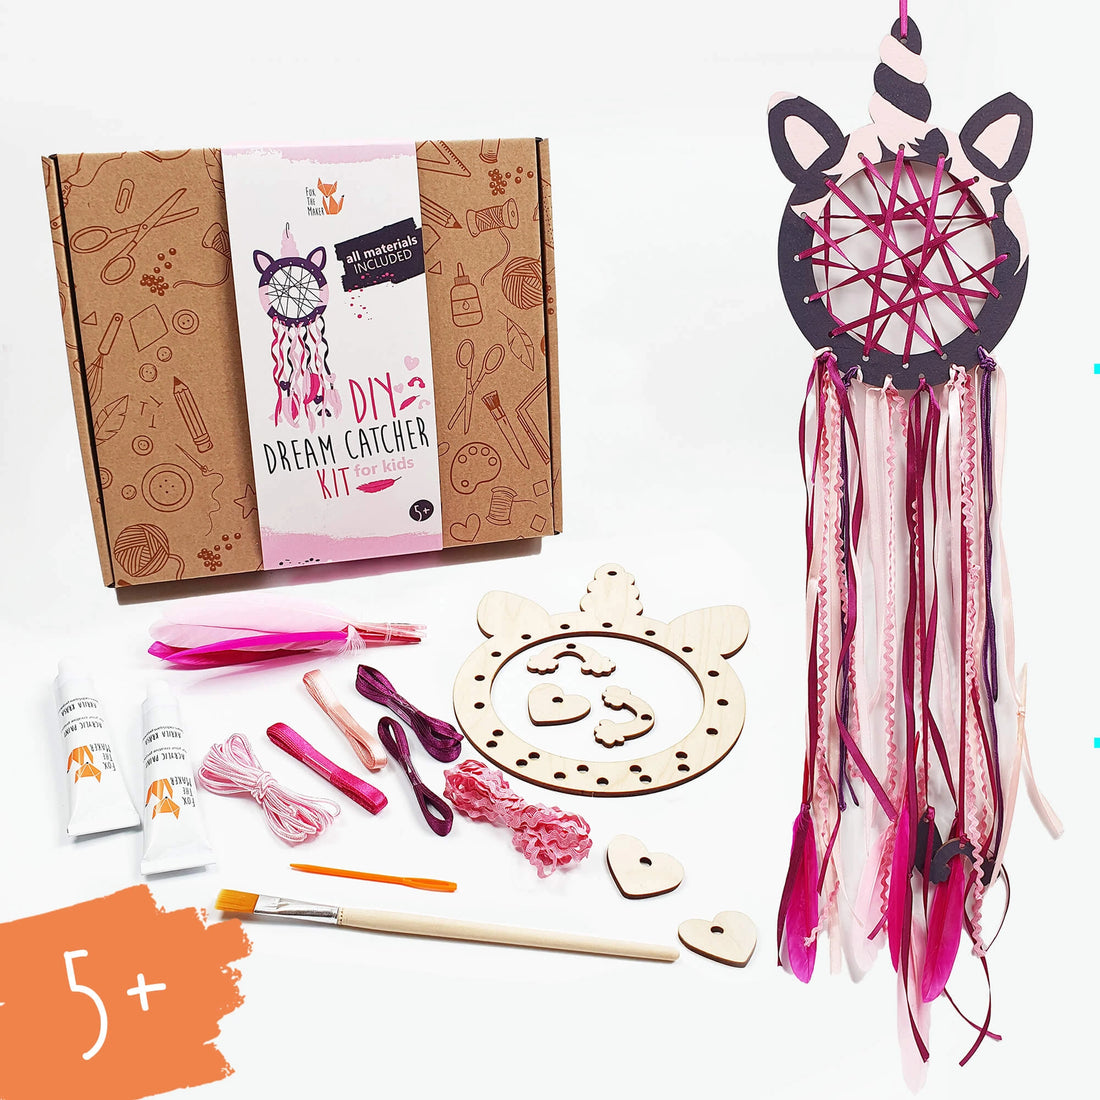 Dream Catcher Kit, DIY Dreamcatcher Kit for Kids, Gifts for Crafty Girls,  Unique Crafts Kit for Girls, Creative Kits, Craft for Christmas 